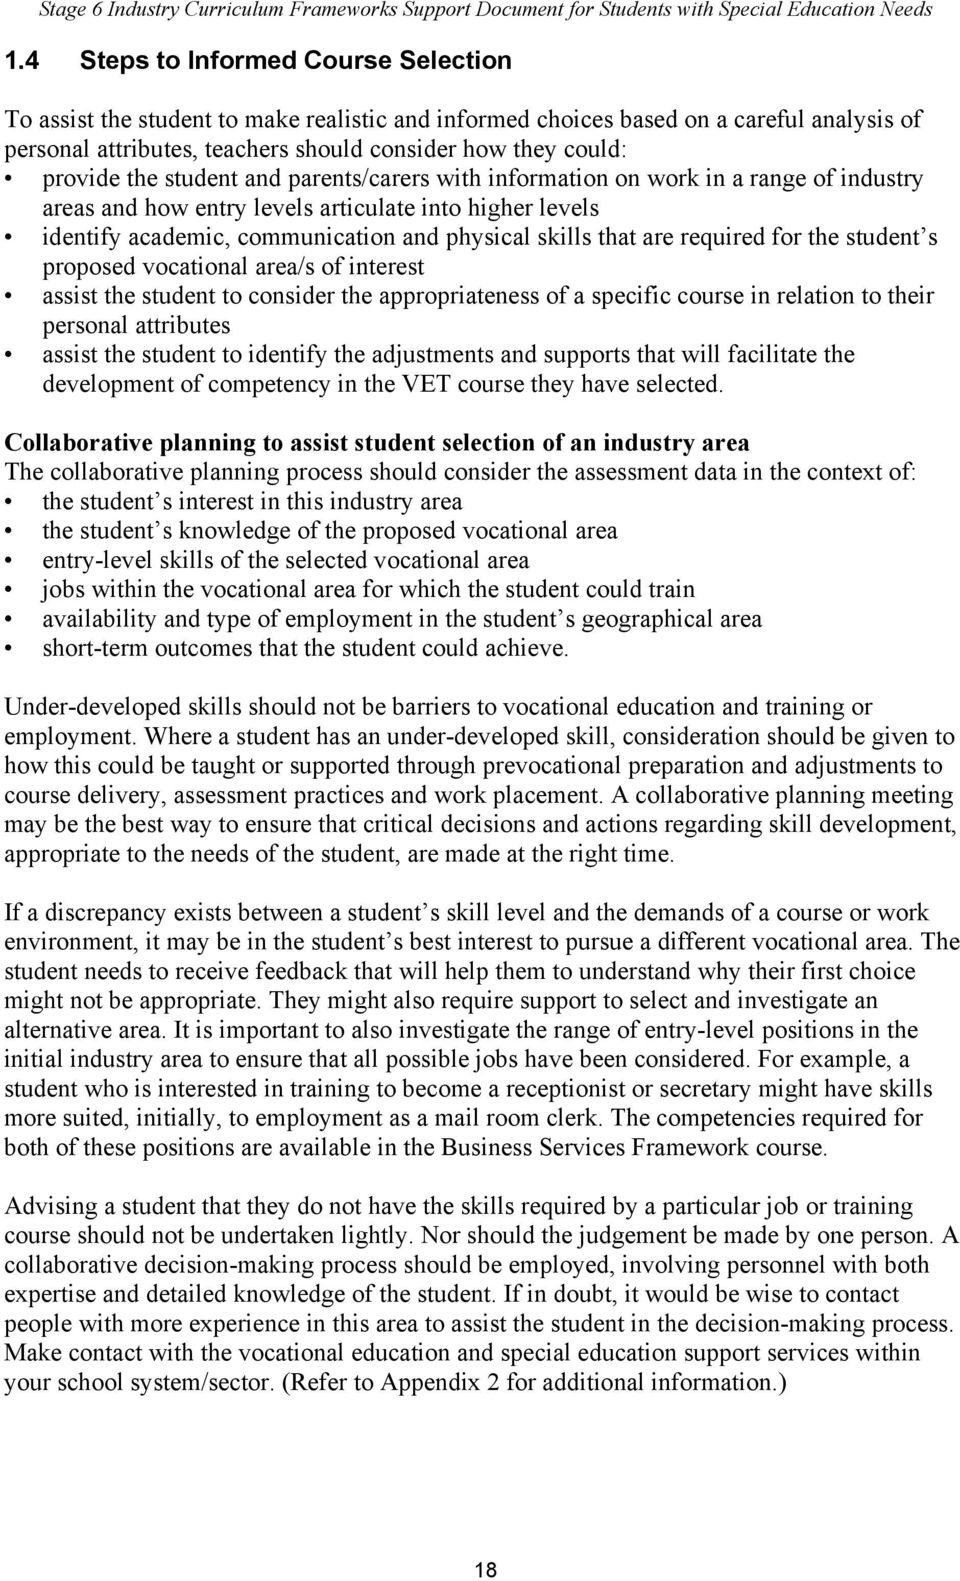 that are required for the student s proposed vocational area/s of interest assist the student to consider the appropriateness of a specific course in relation to their personal attributes assist the